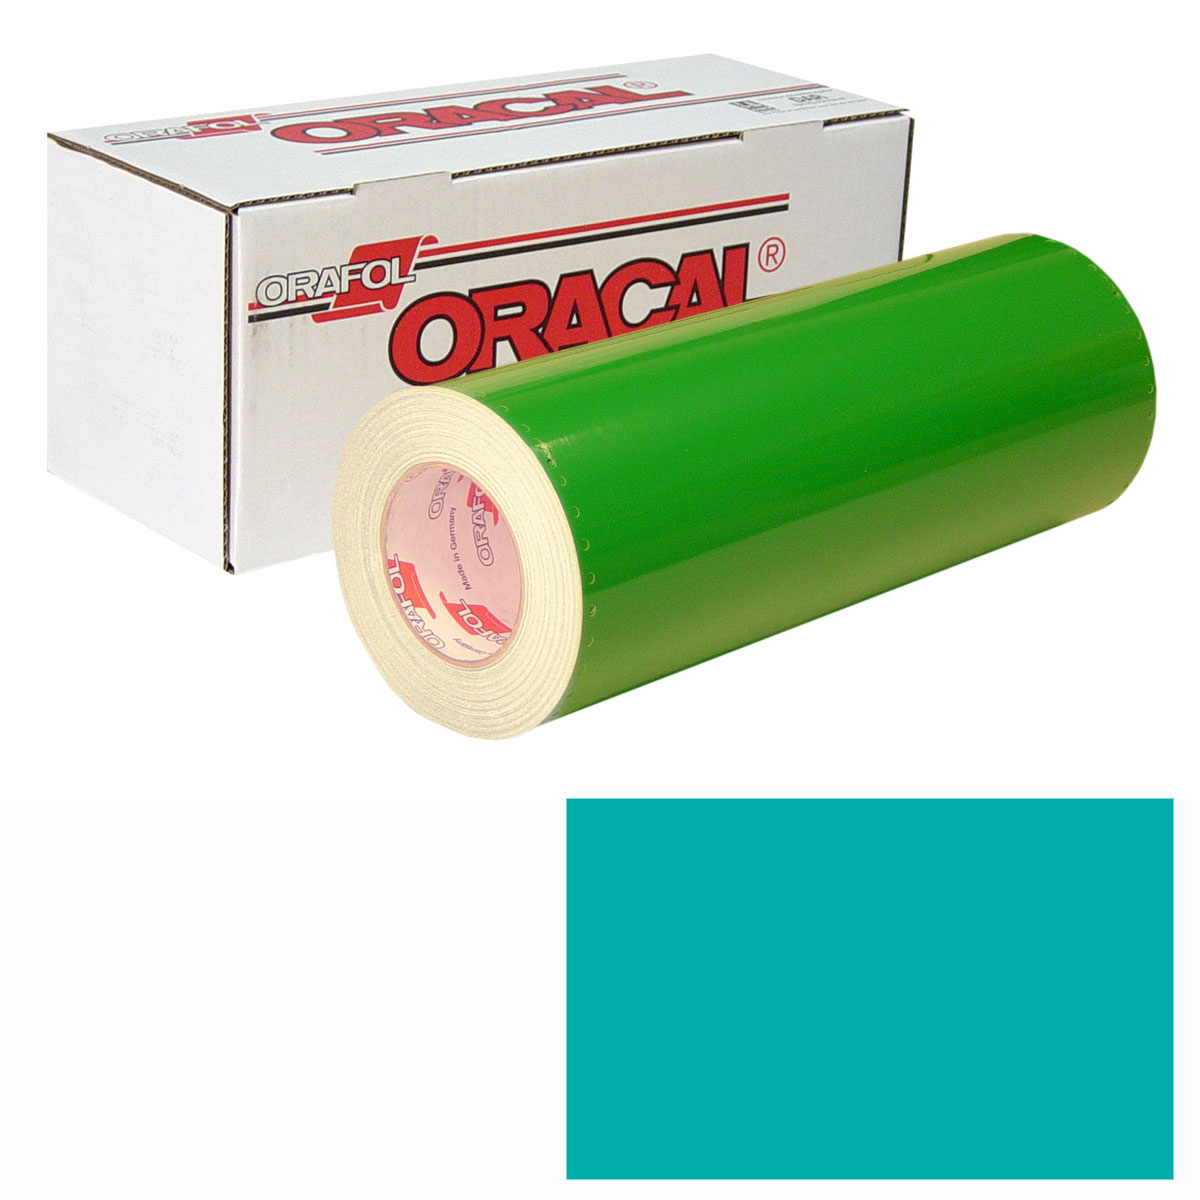 ORACAL 651 Unp 24in X 50yd 054 Turquoise